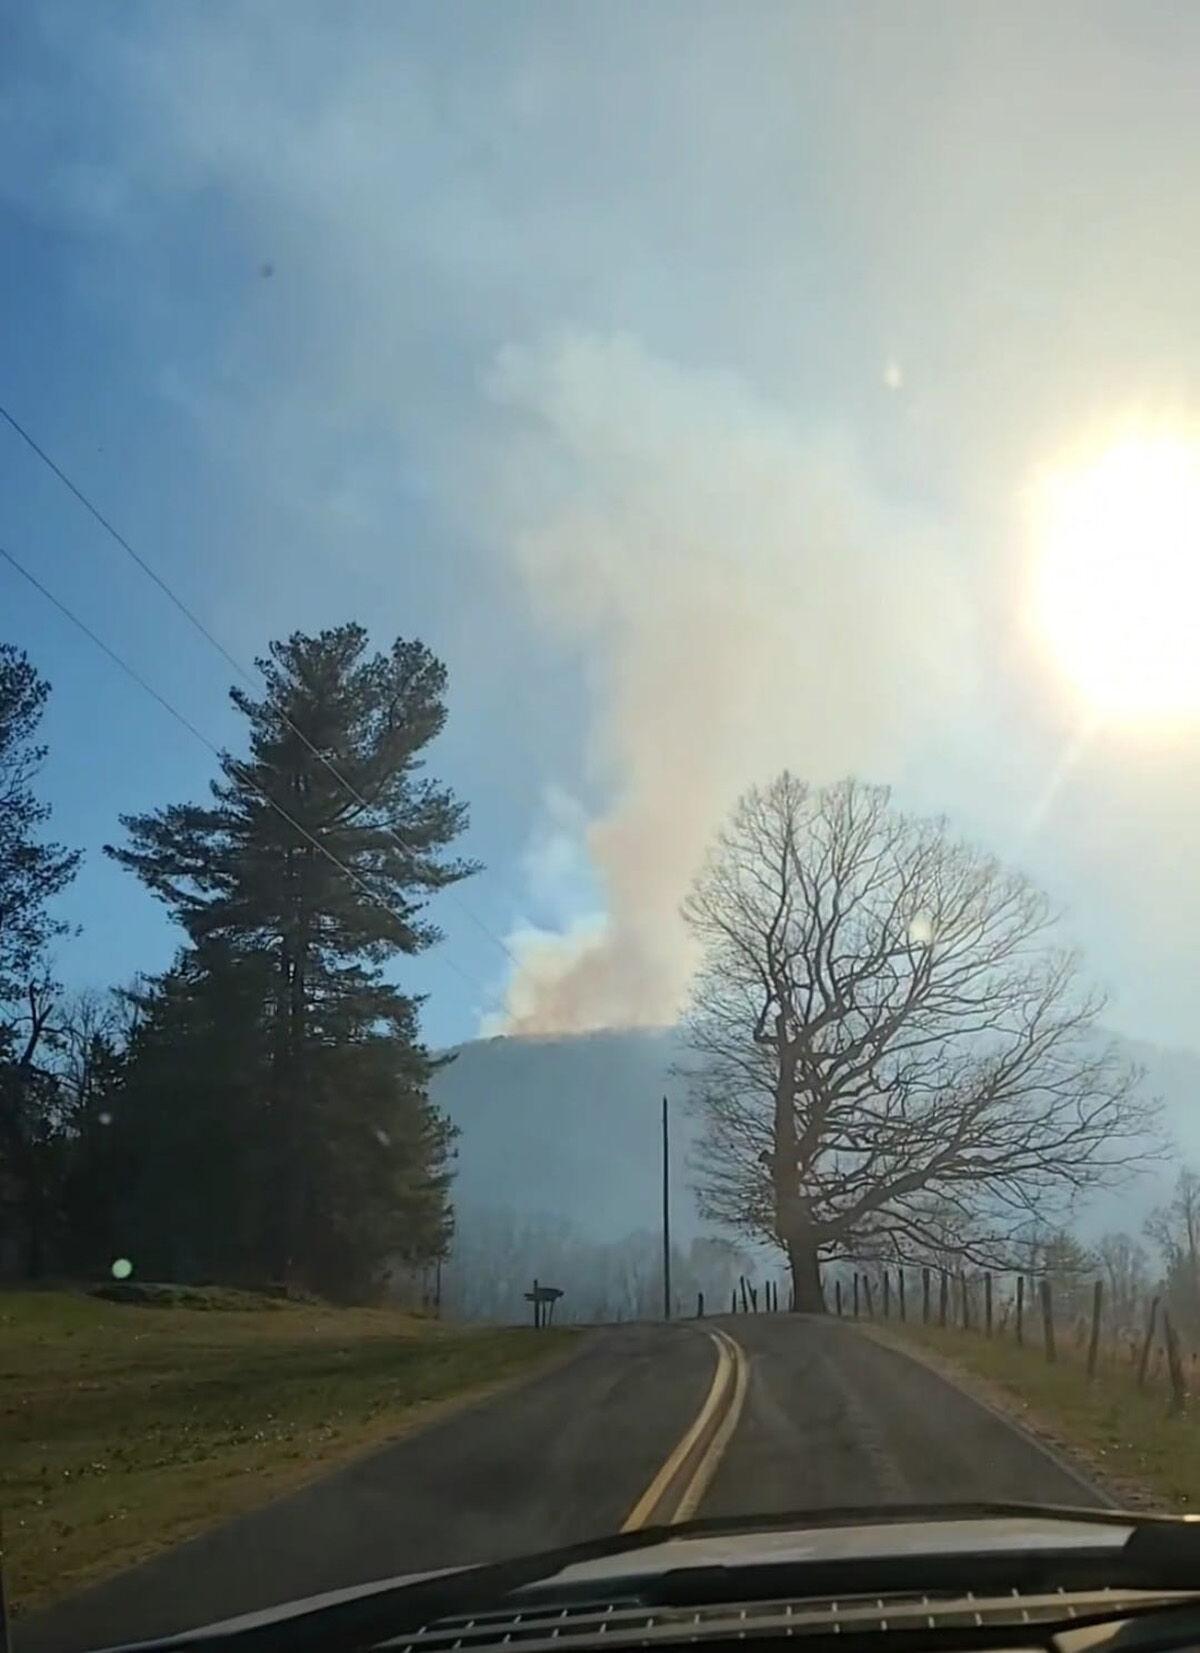 Fire officials: Nearly 50 acres burned in Pogue Mountain fire